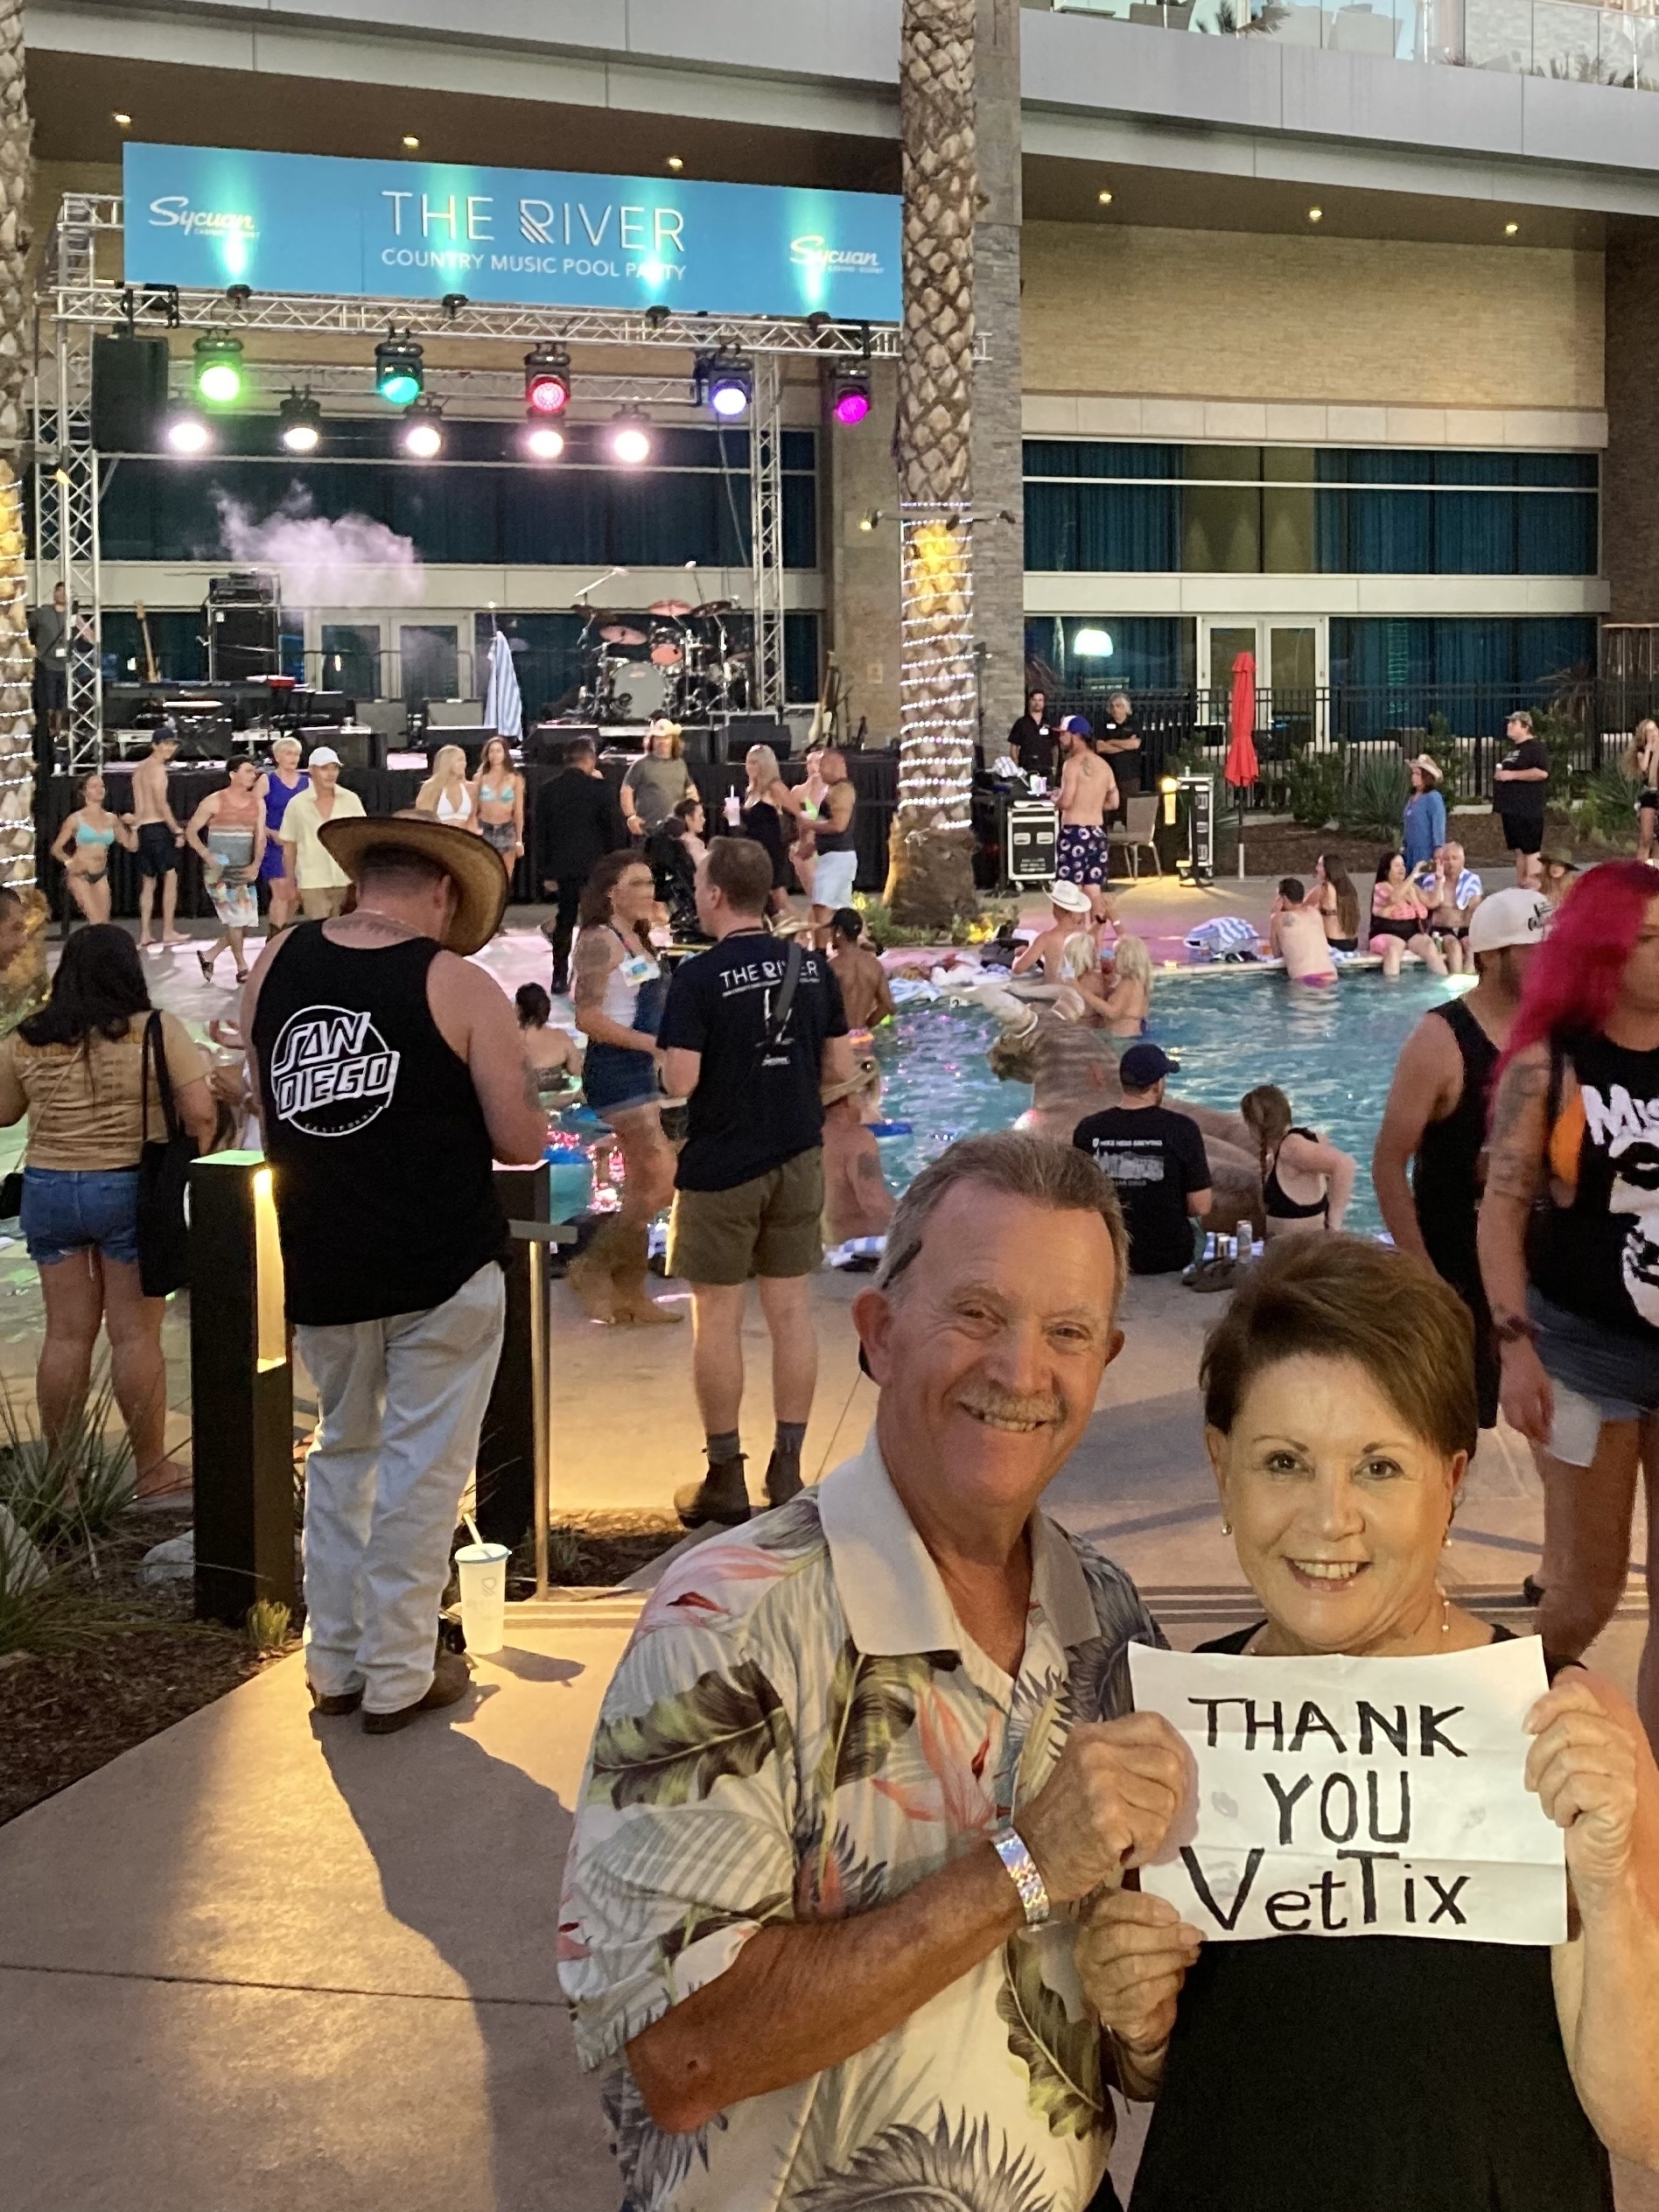 The River Country Pool Party Featuring Chase Bryant